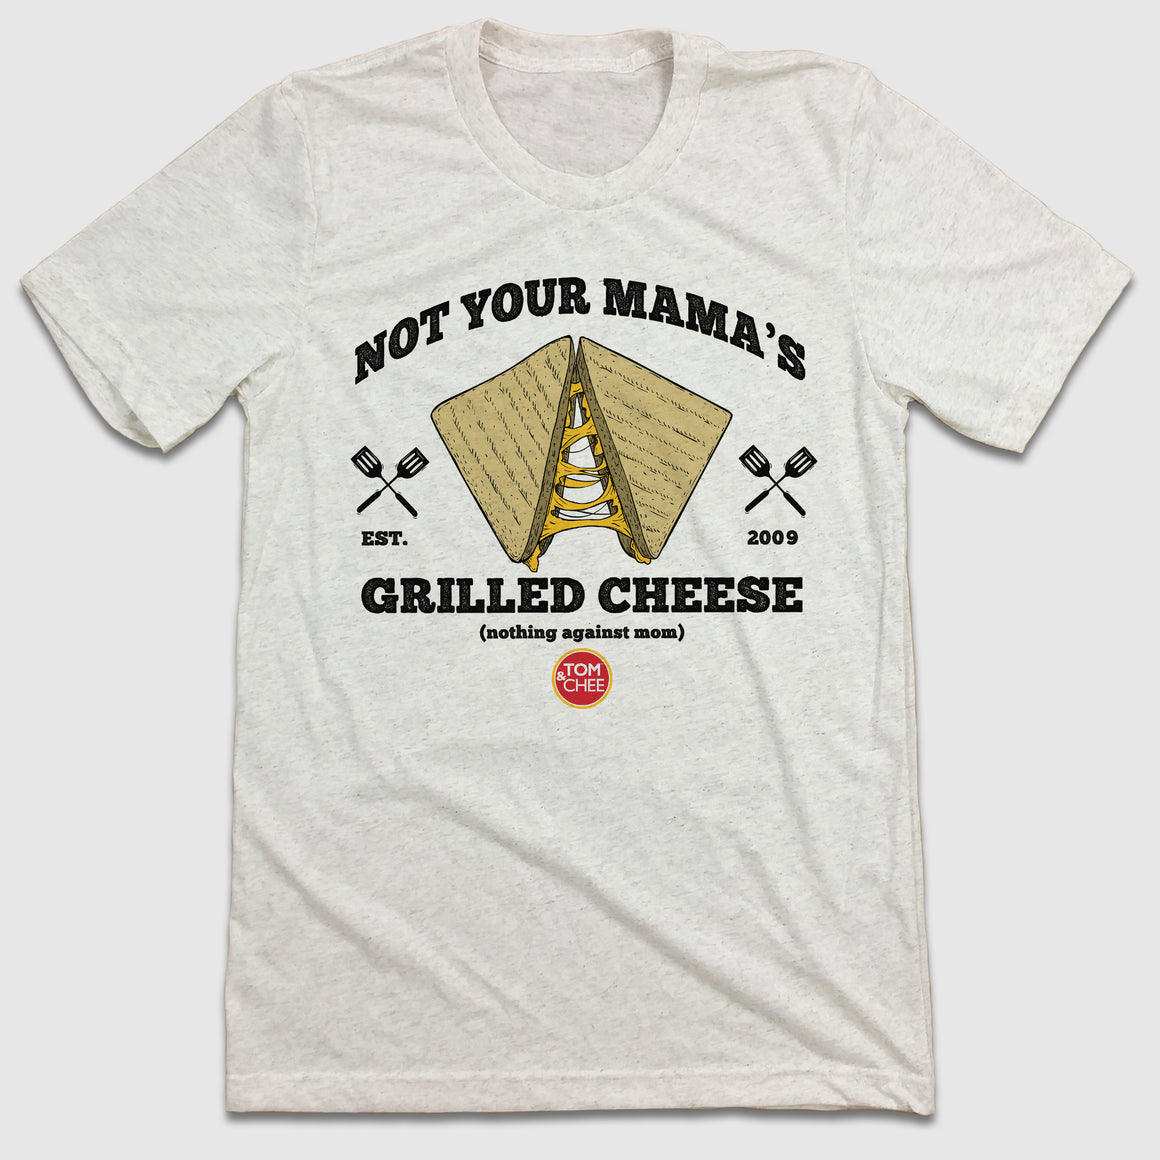 Tom & Chee Not Your Mama's Grilled Cheese - Cincy Shirts